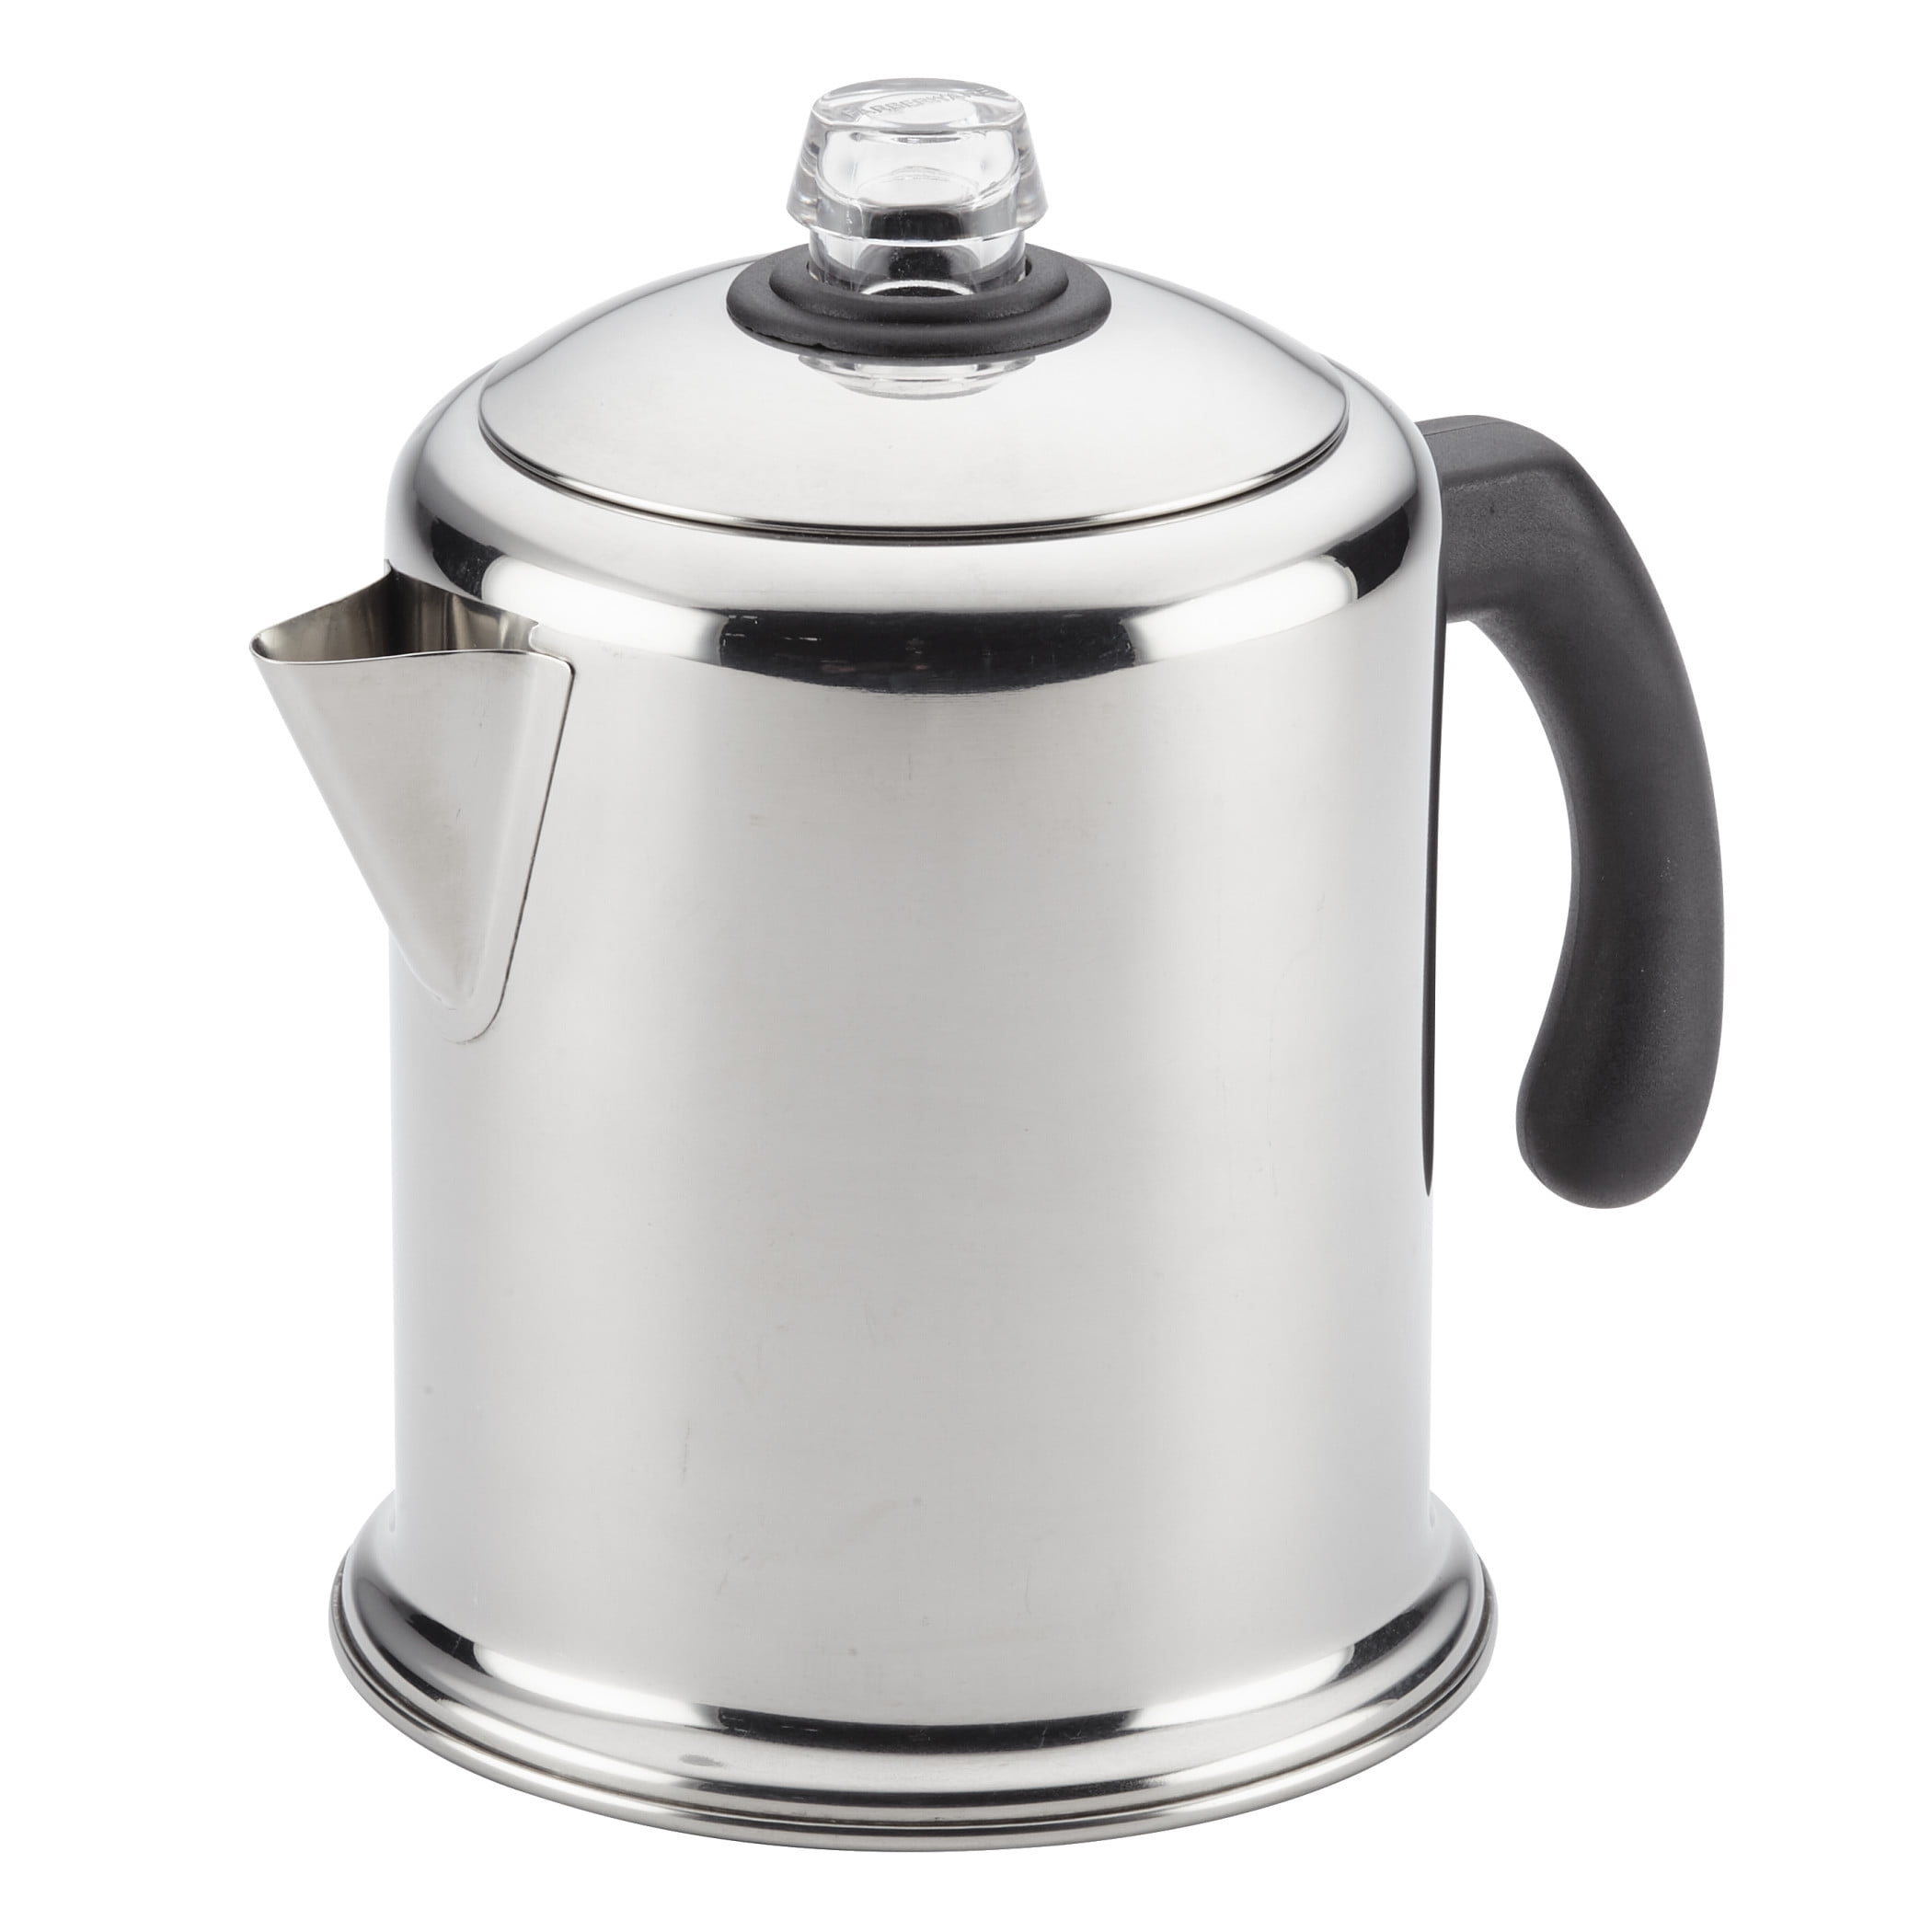 Mixpresso Stainless Steel Stovetop Coffee Percolator, Percolator Coffee Pot, Excellent for Camping Coffee Pot, 12 Cup Stainless Steel Coffee